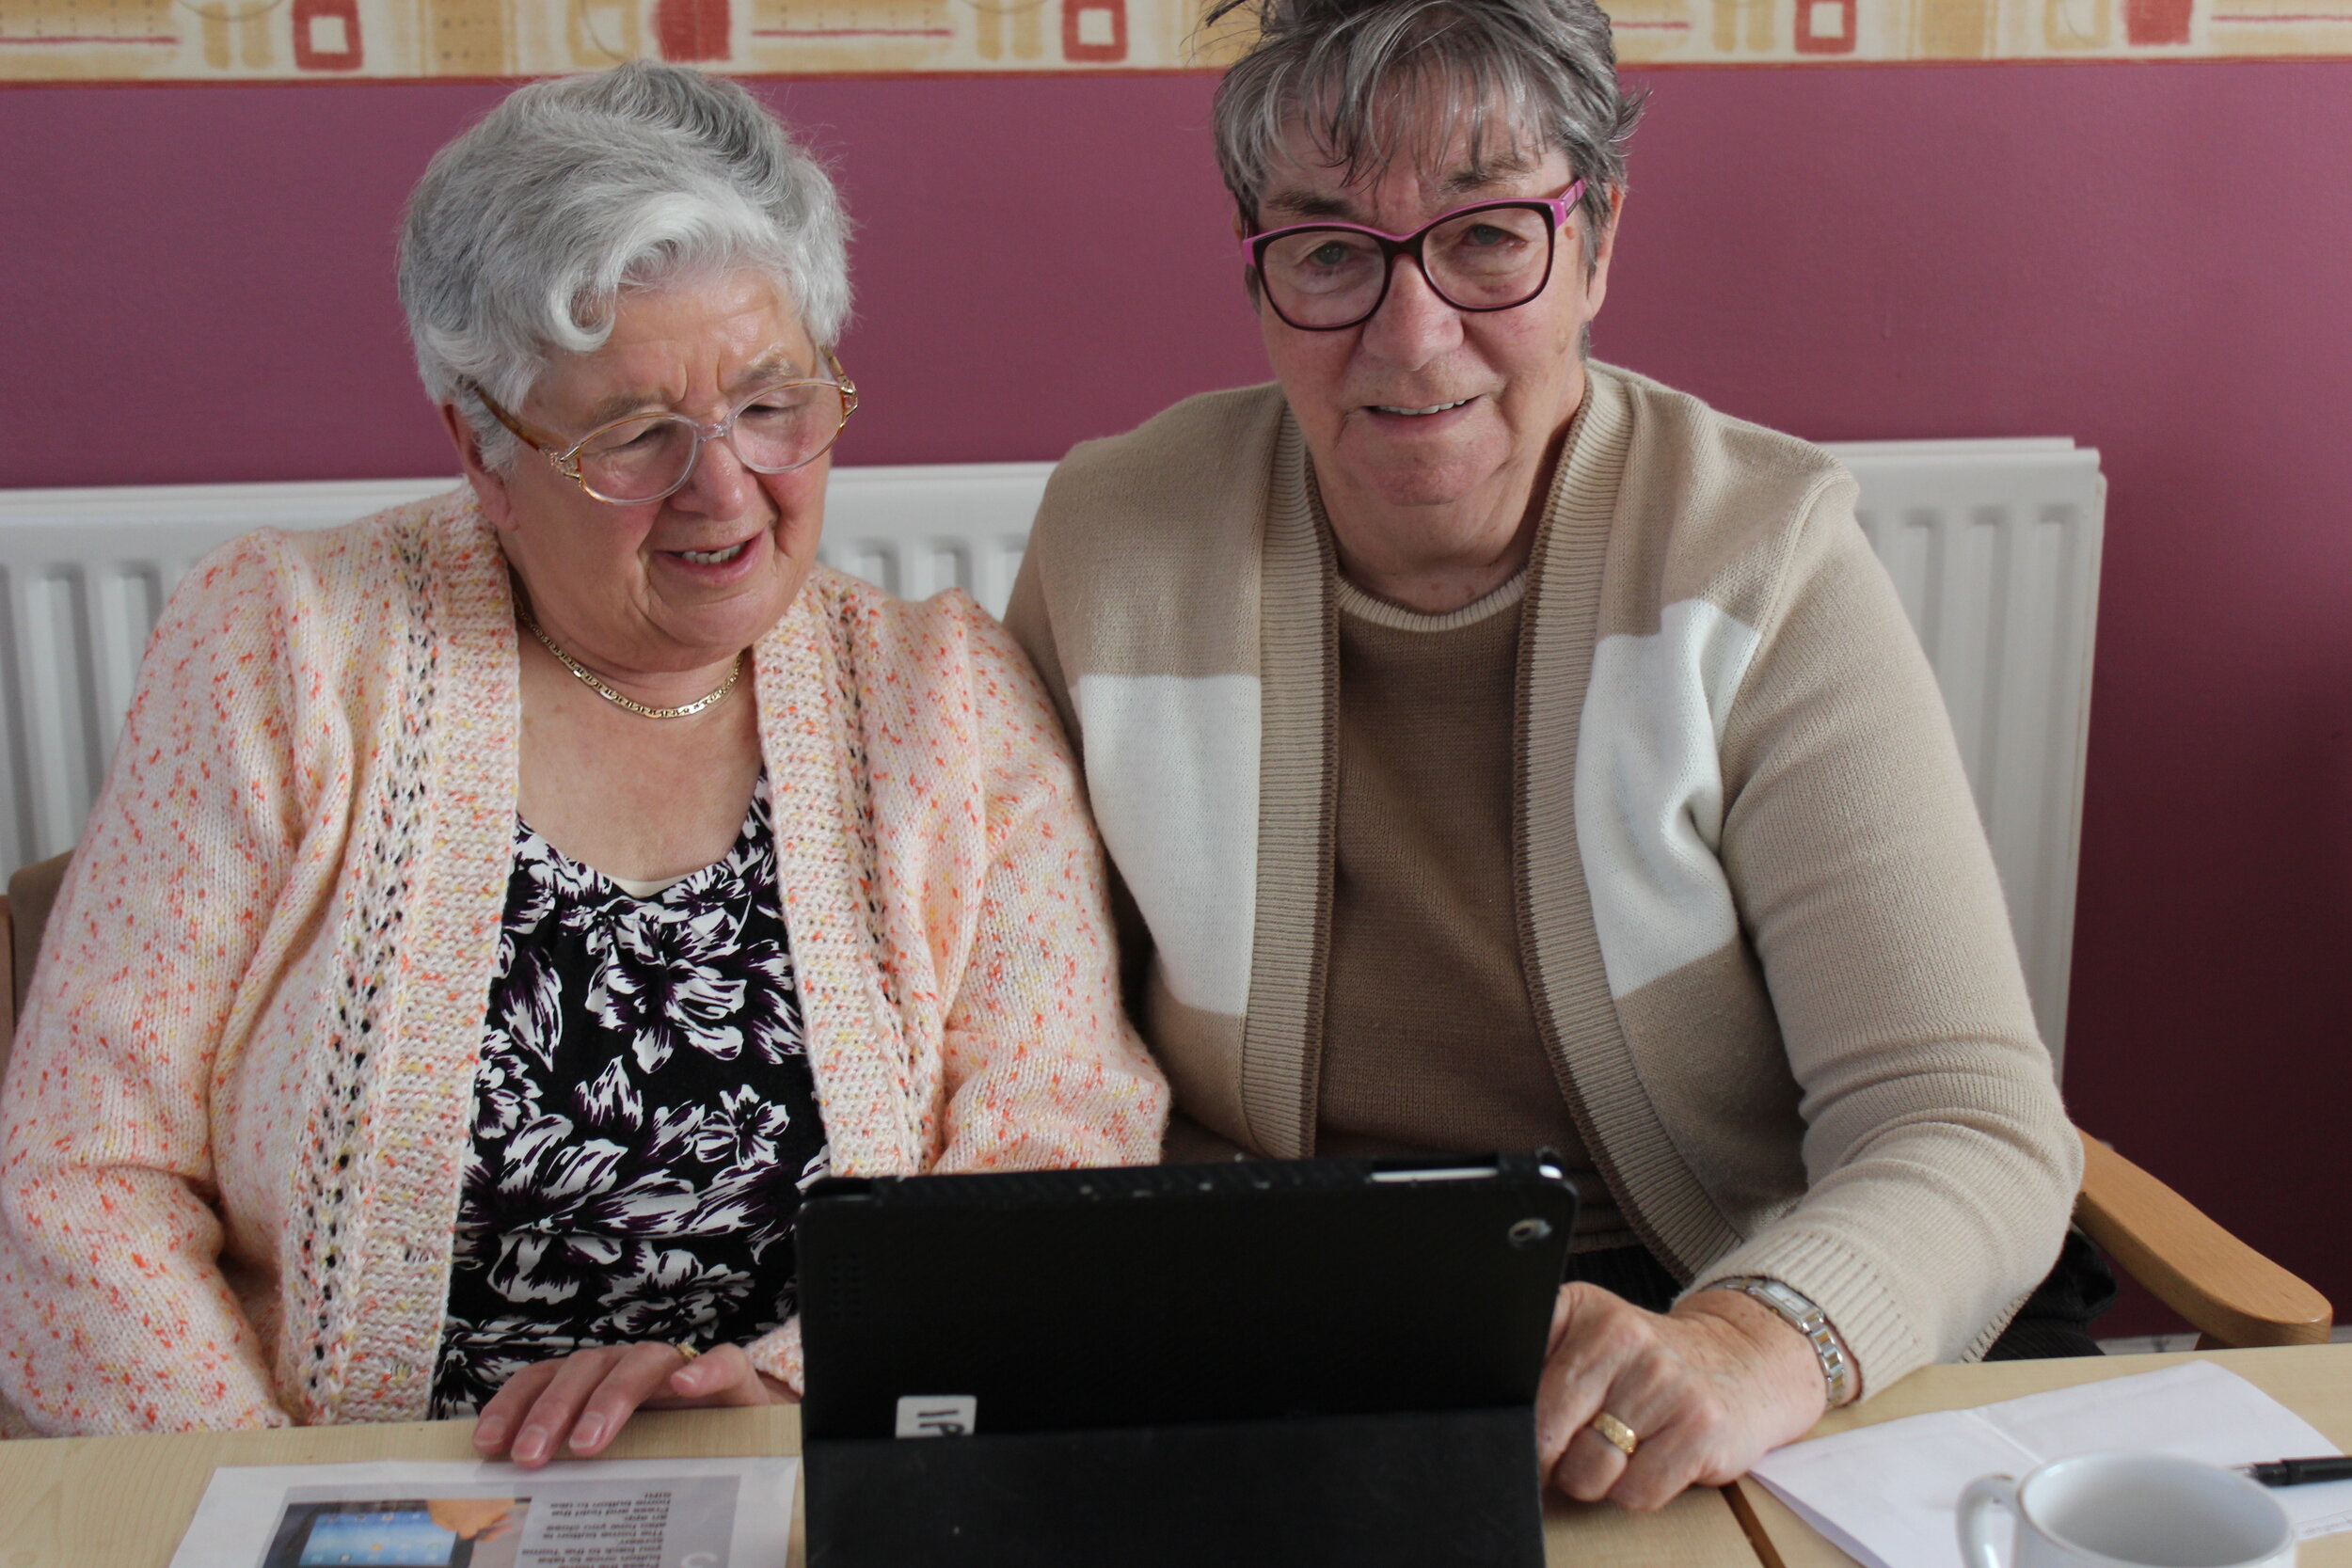 Two older people learning to use ipads